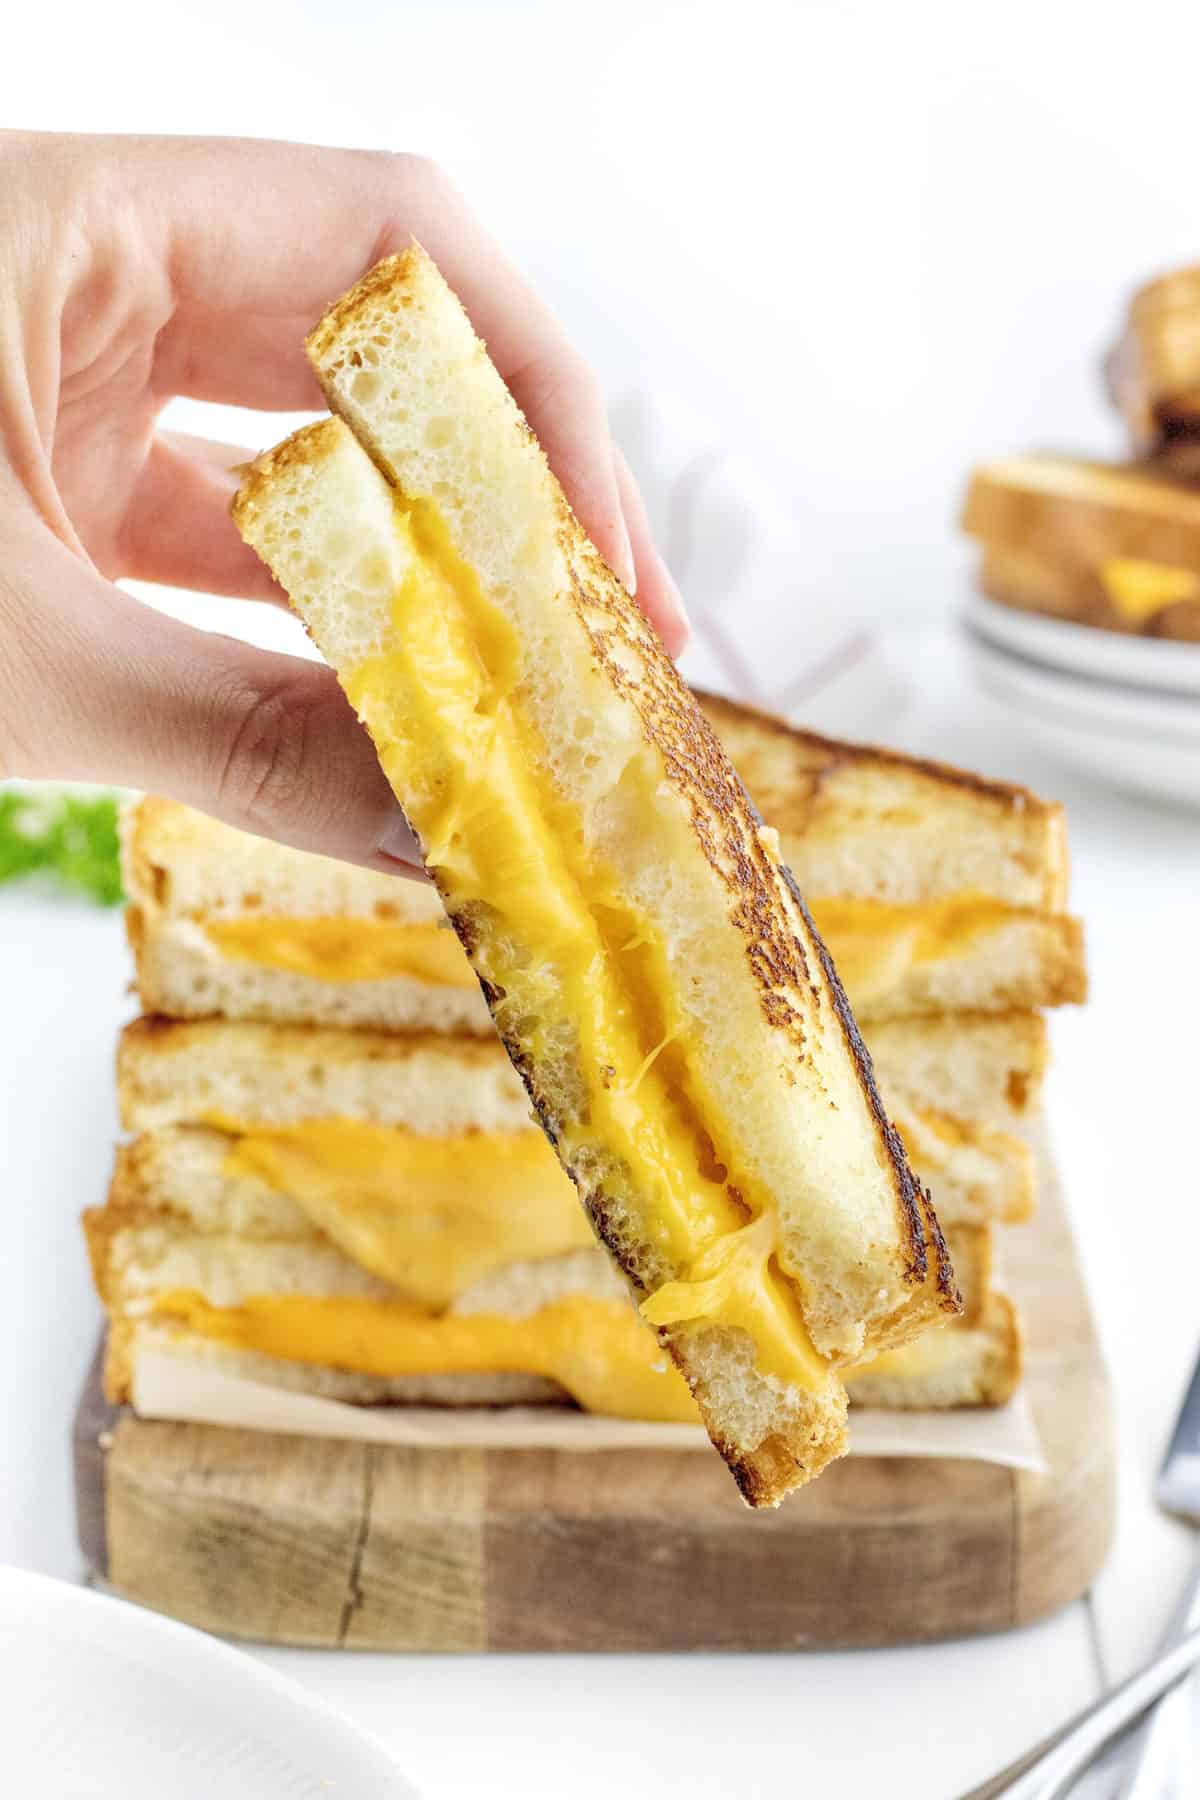 How to Make Great Grilled Cheese by The BakerMama